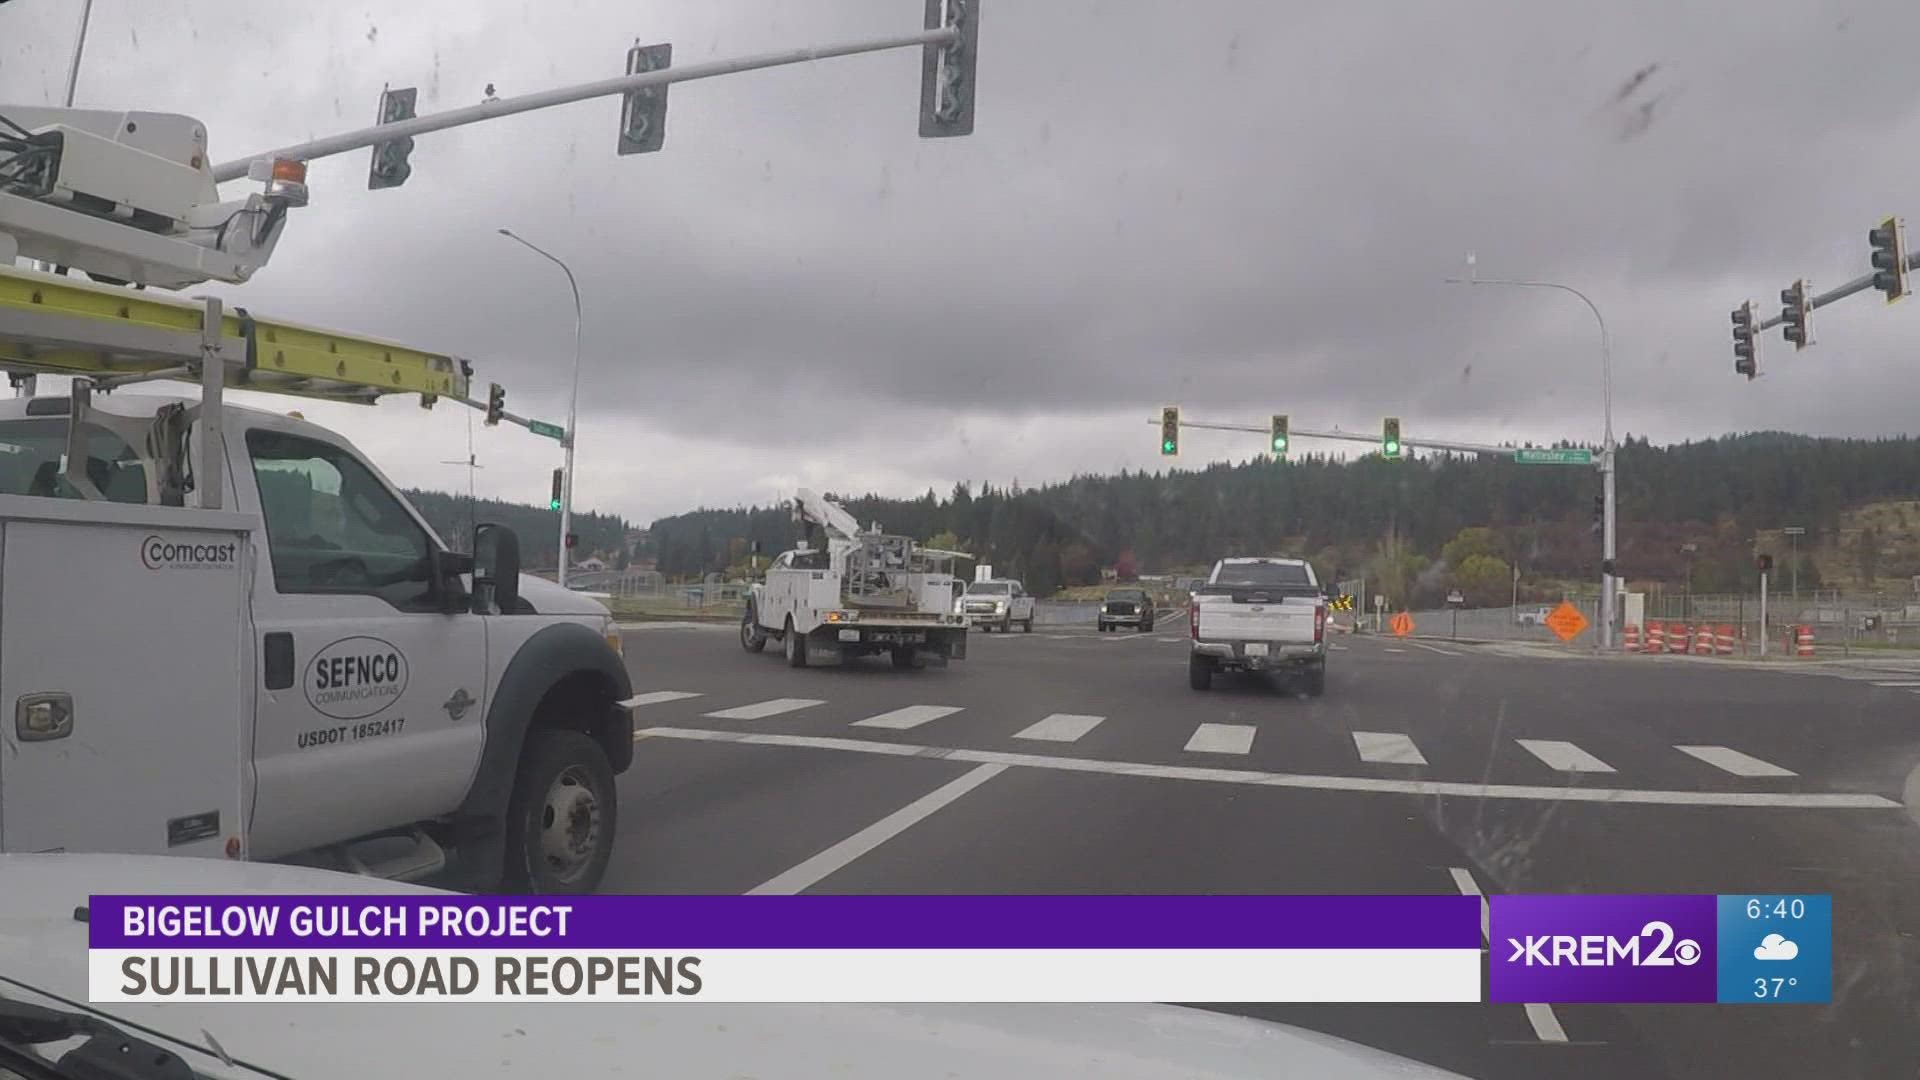 The reopening of Sullivan Road is good news for hundreds of drivers that use Bigelow Gulch and Forker Road every day to drive to their destinations.